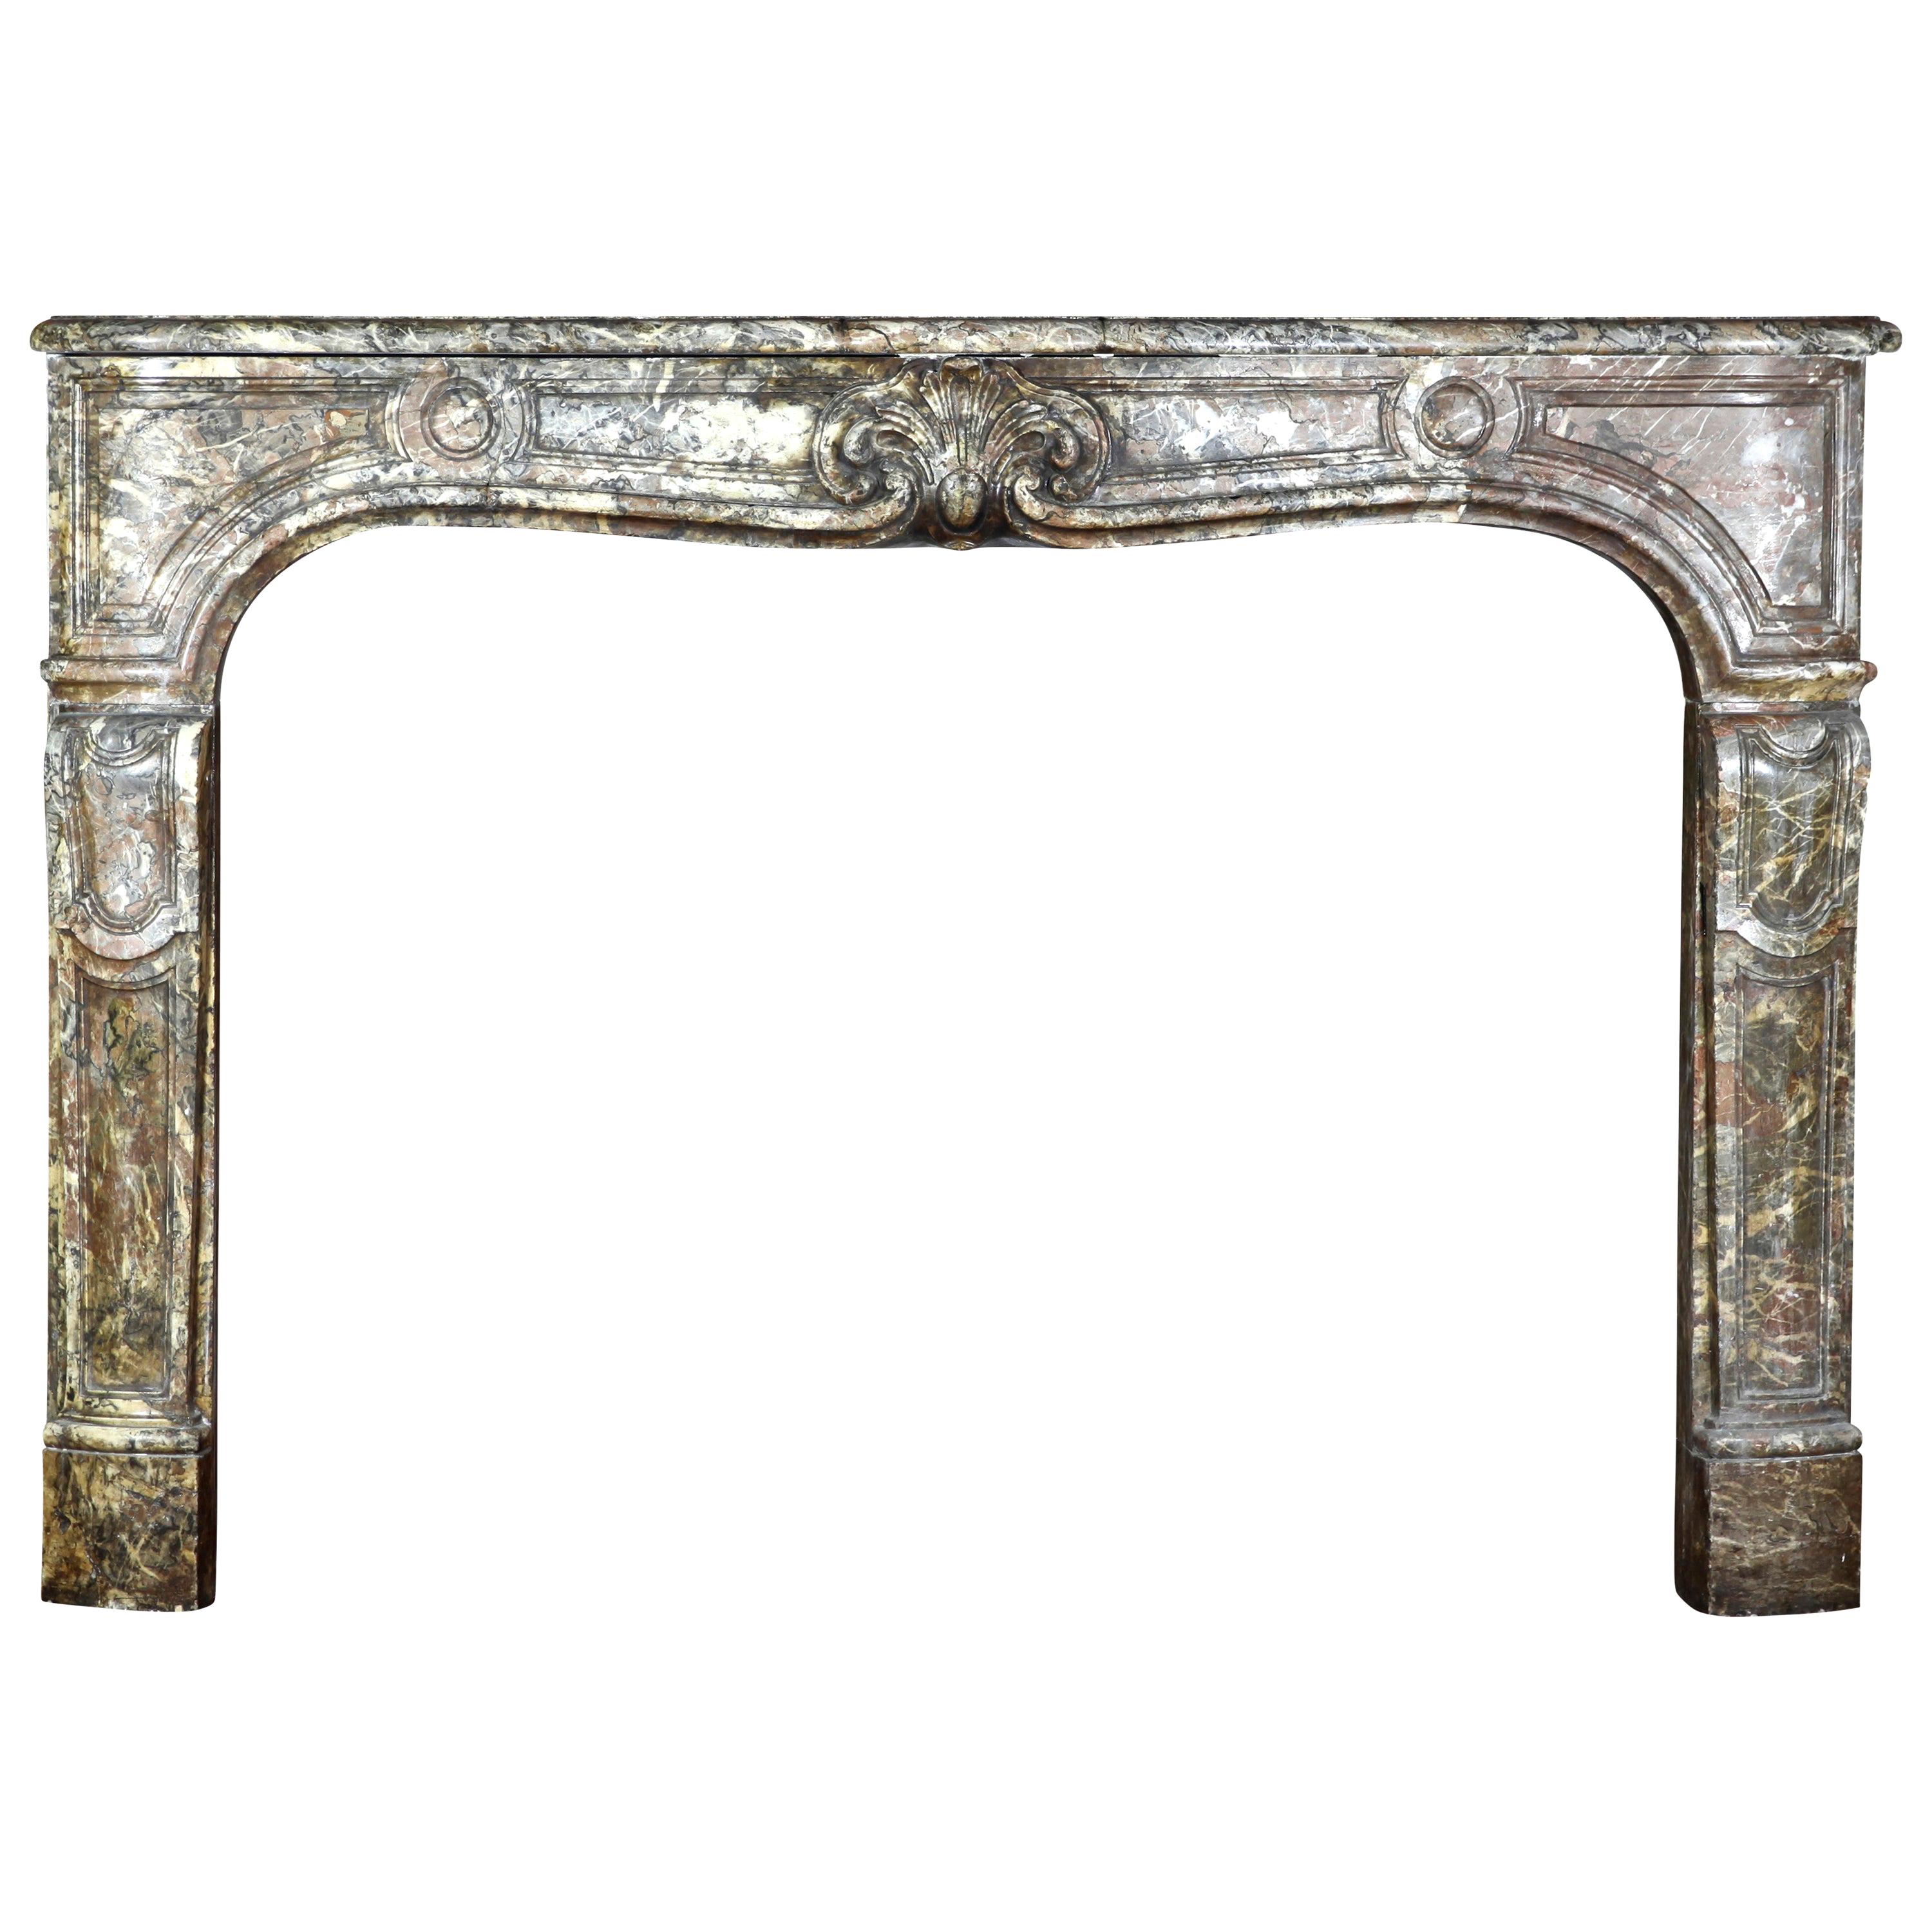 Fine Classic French Regency Period Antique Fireplace Surround in Marble